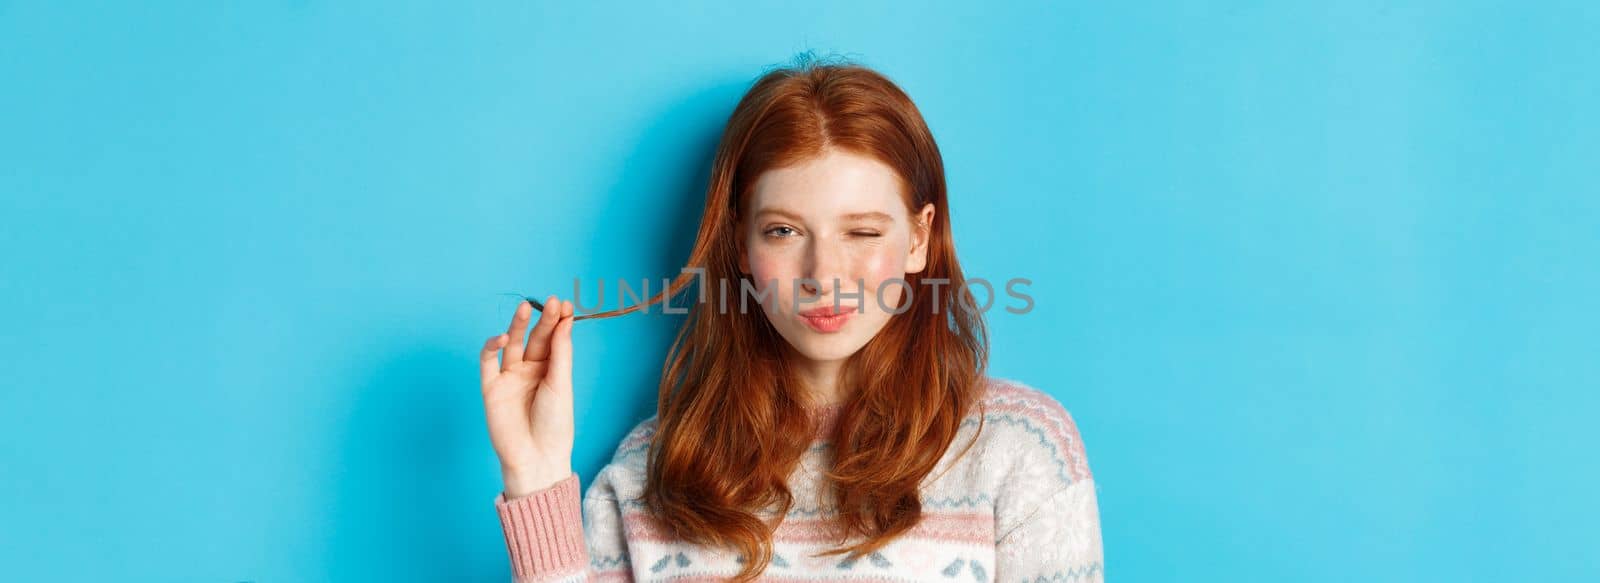 Close-up of cheeky redhead girl playing with hair strand, winking and smiling at camera, standing over blue background.